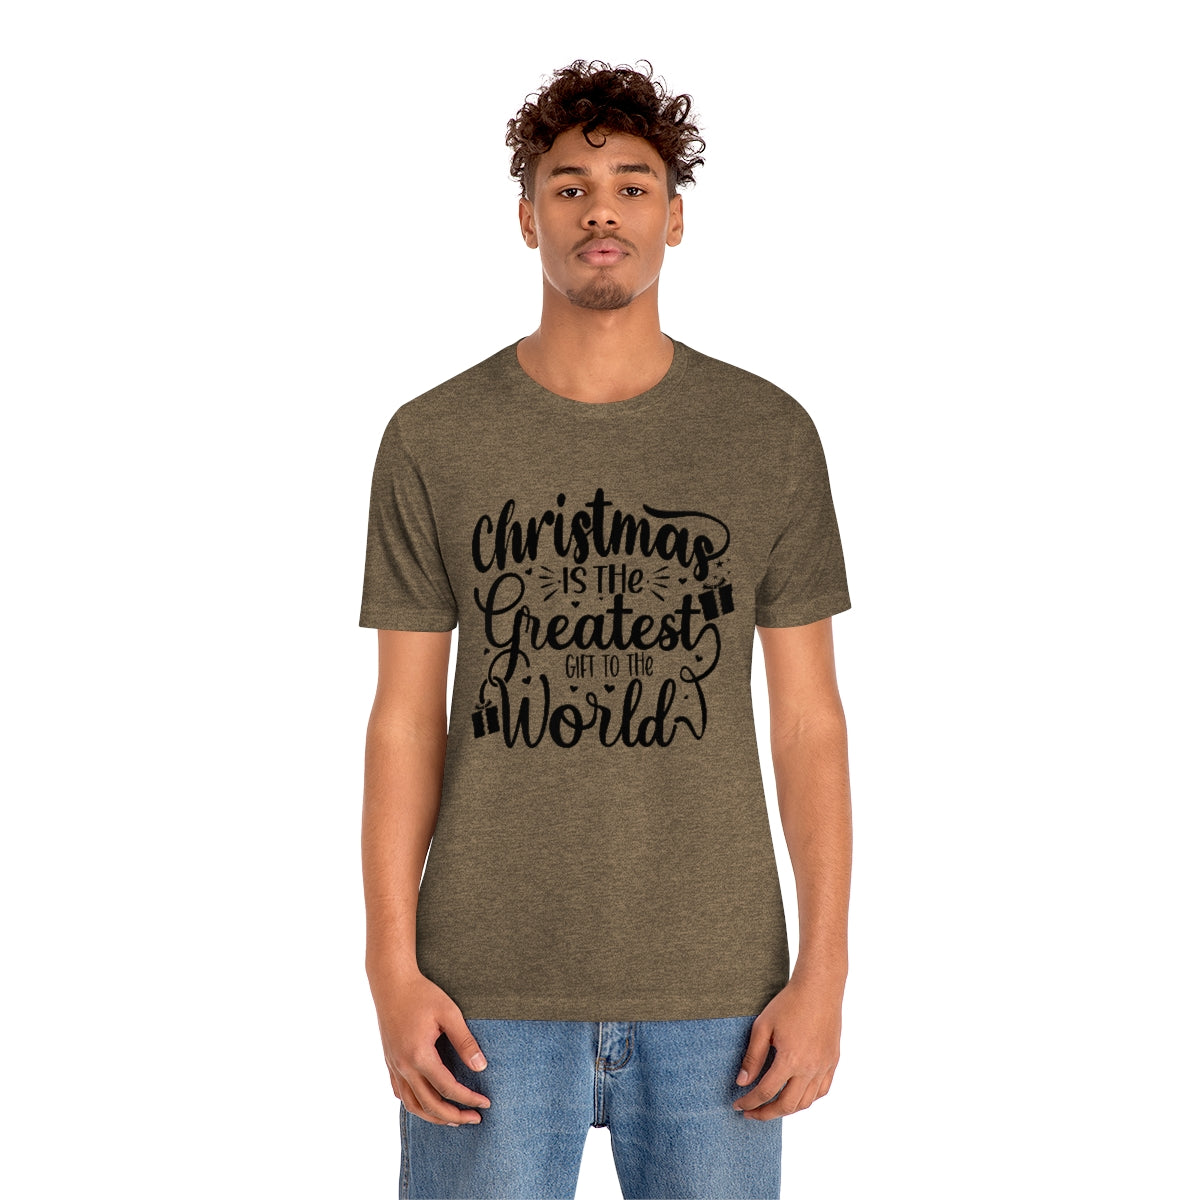 The greatest gift to the world Christmas Tee, Christmas T-shirt, Merry Christmas T-shirt, Unisex T-shirts, Unisex jersey short sleeve tee